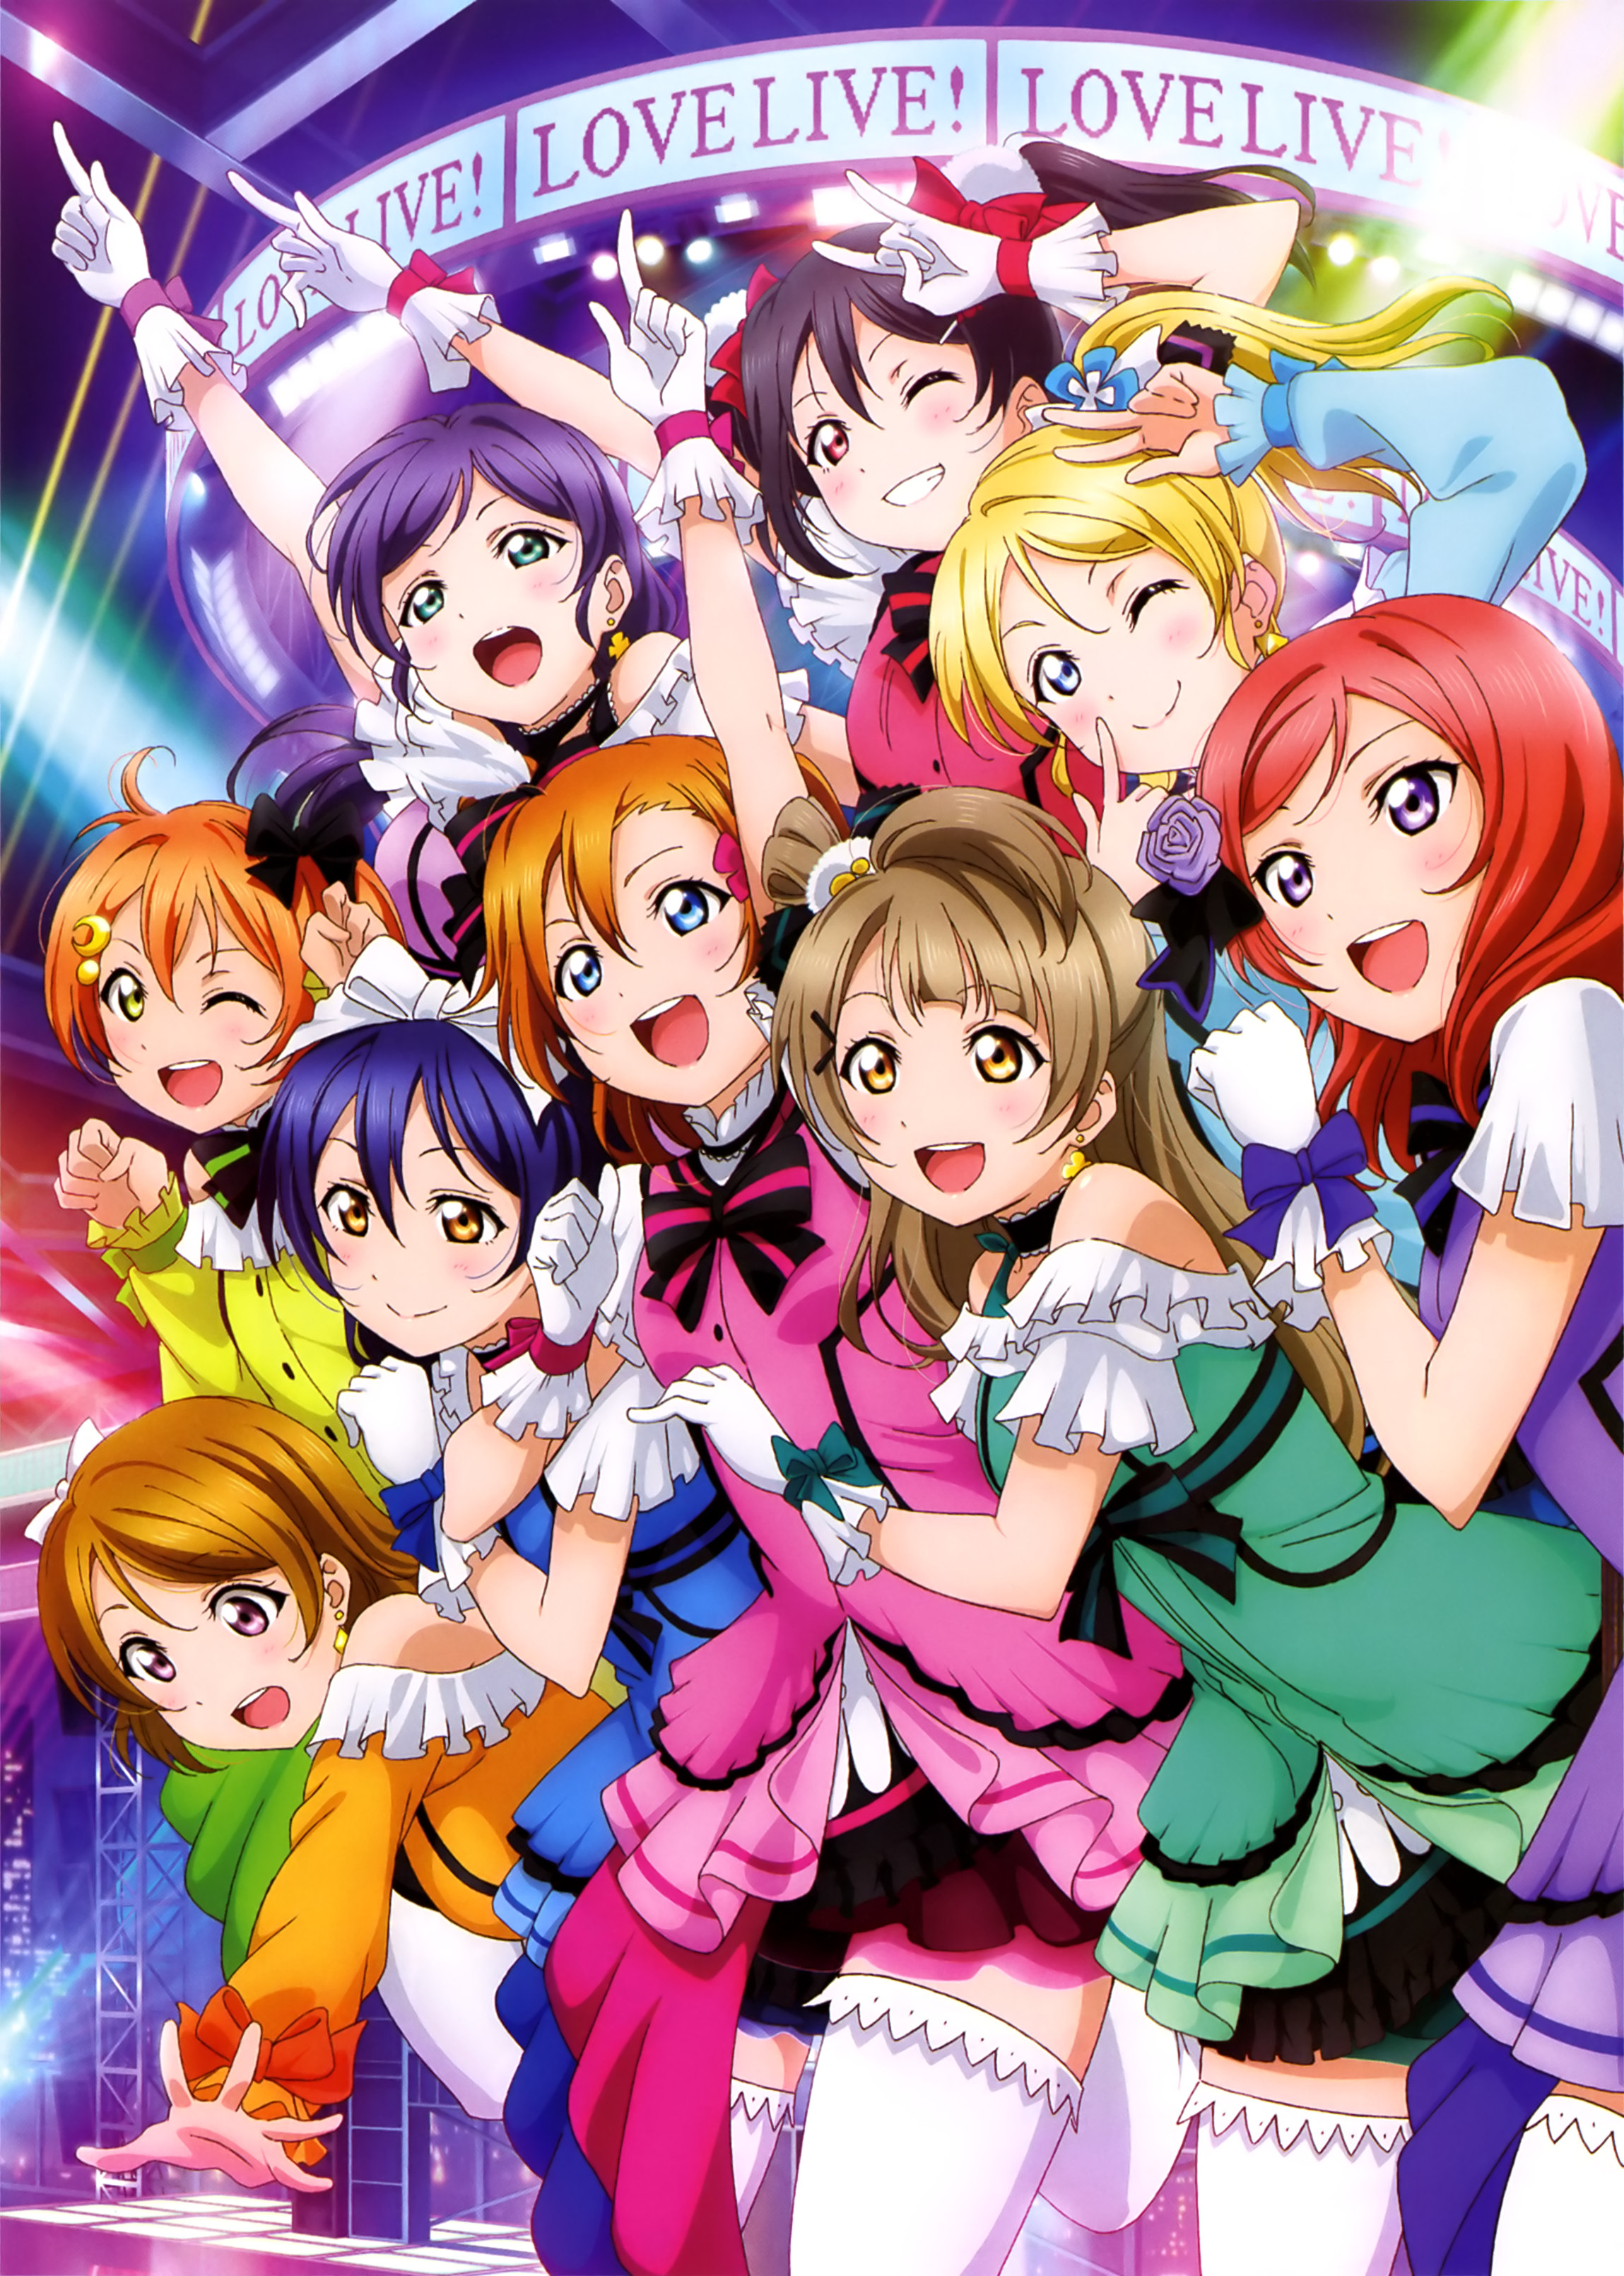 Download Μ's Image , HD Wallpaper & Backgrounds